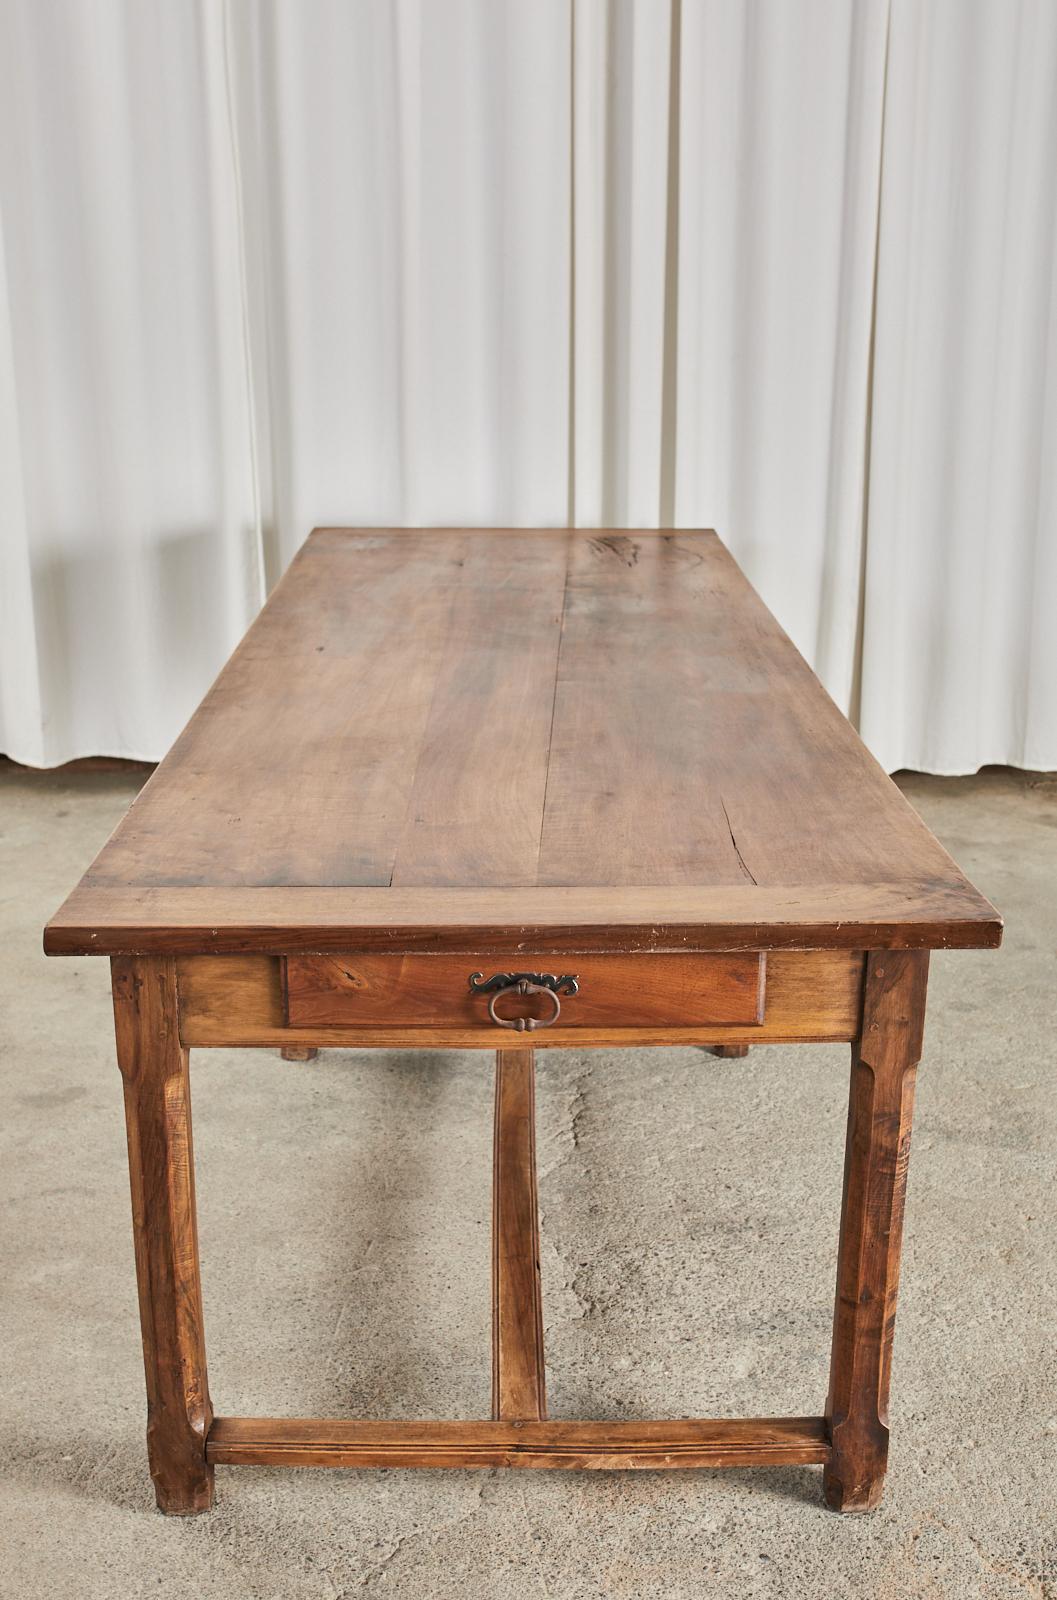 19th Century Country French Provincial Walnut Farmhouse Dining Table In Distressed Condition For Sale In Rio Vista, CA